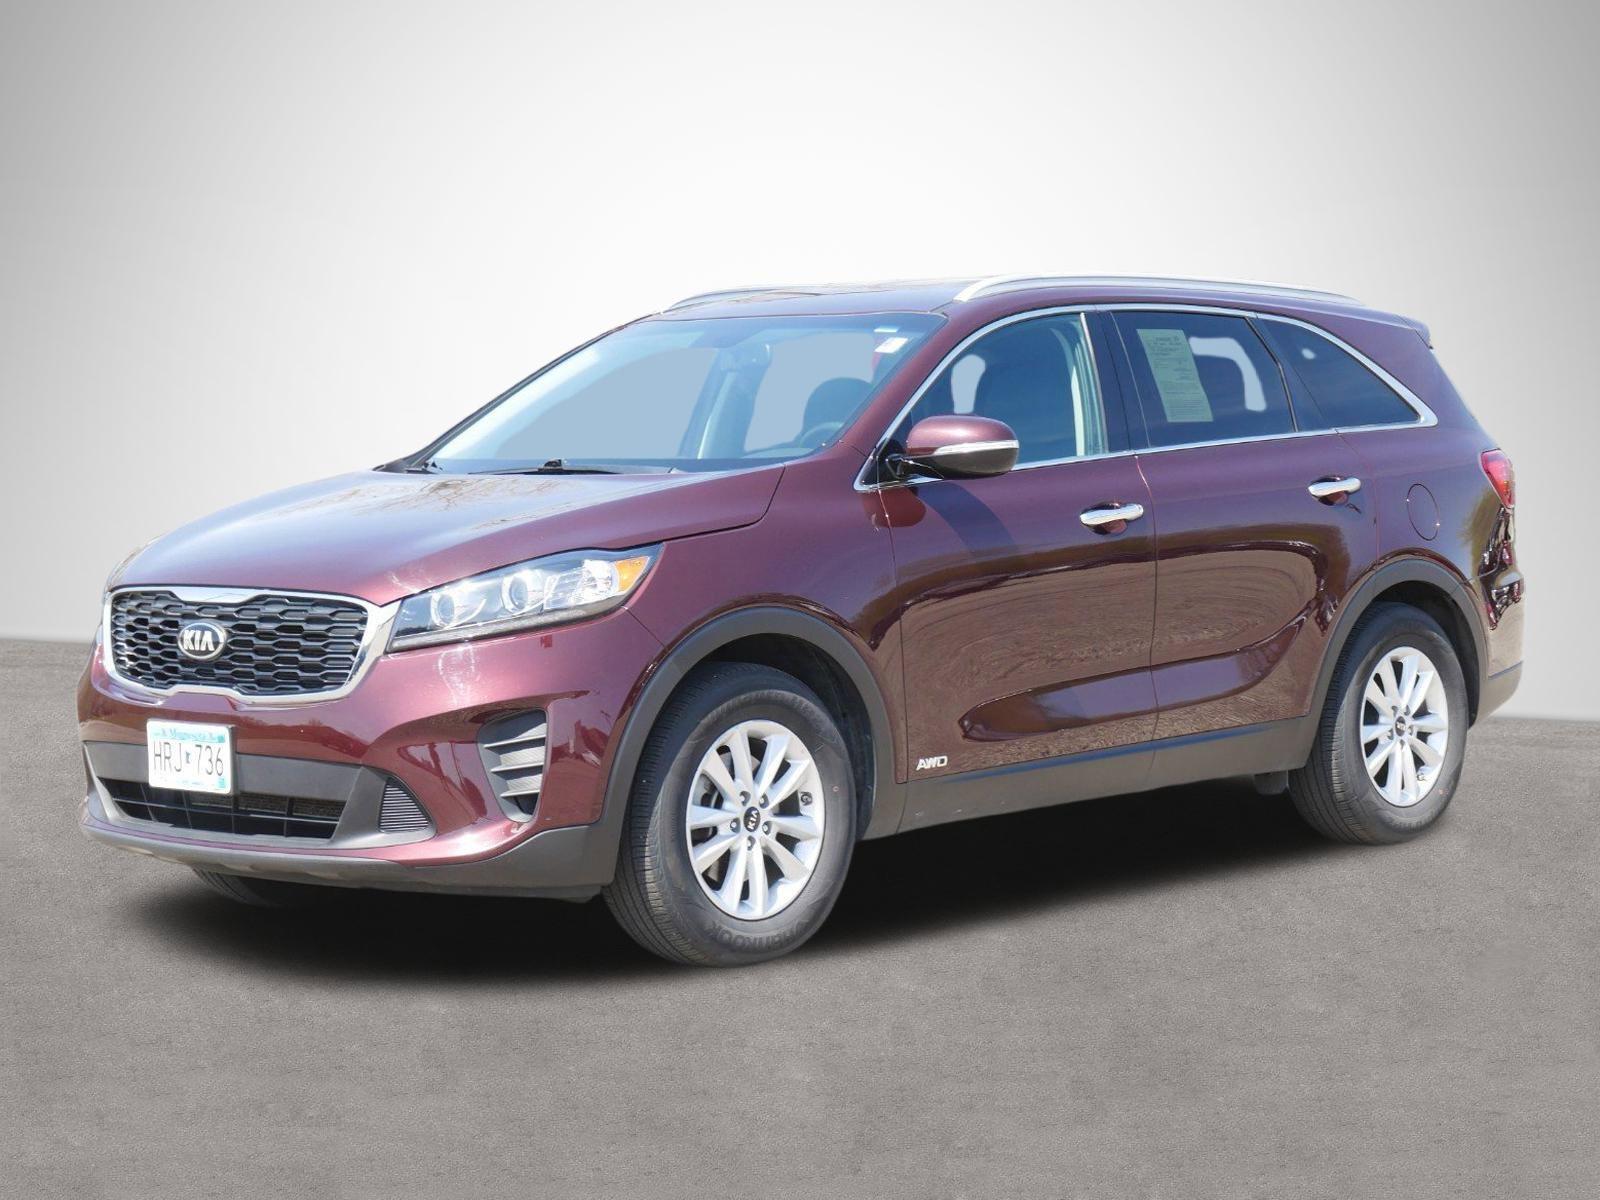 Used 2019 Kia Sorento LX with VIN 5XYPGDA33KG439832 for sale in Red Wing, Minnesota